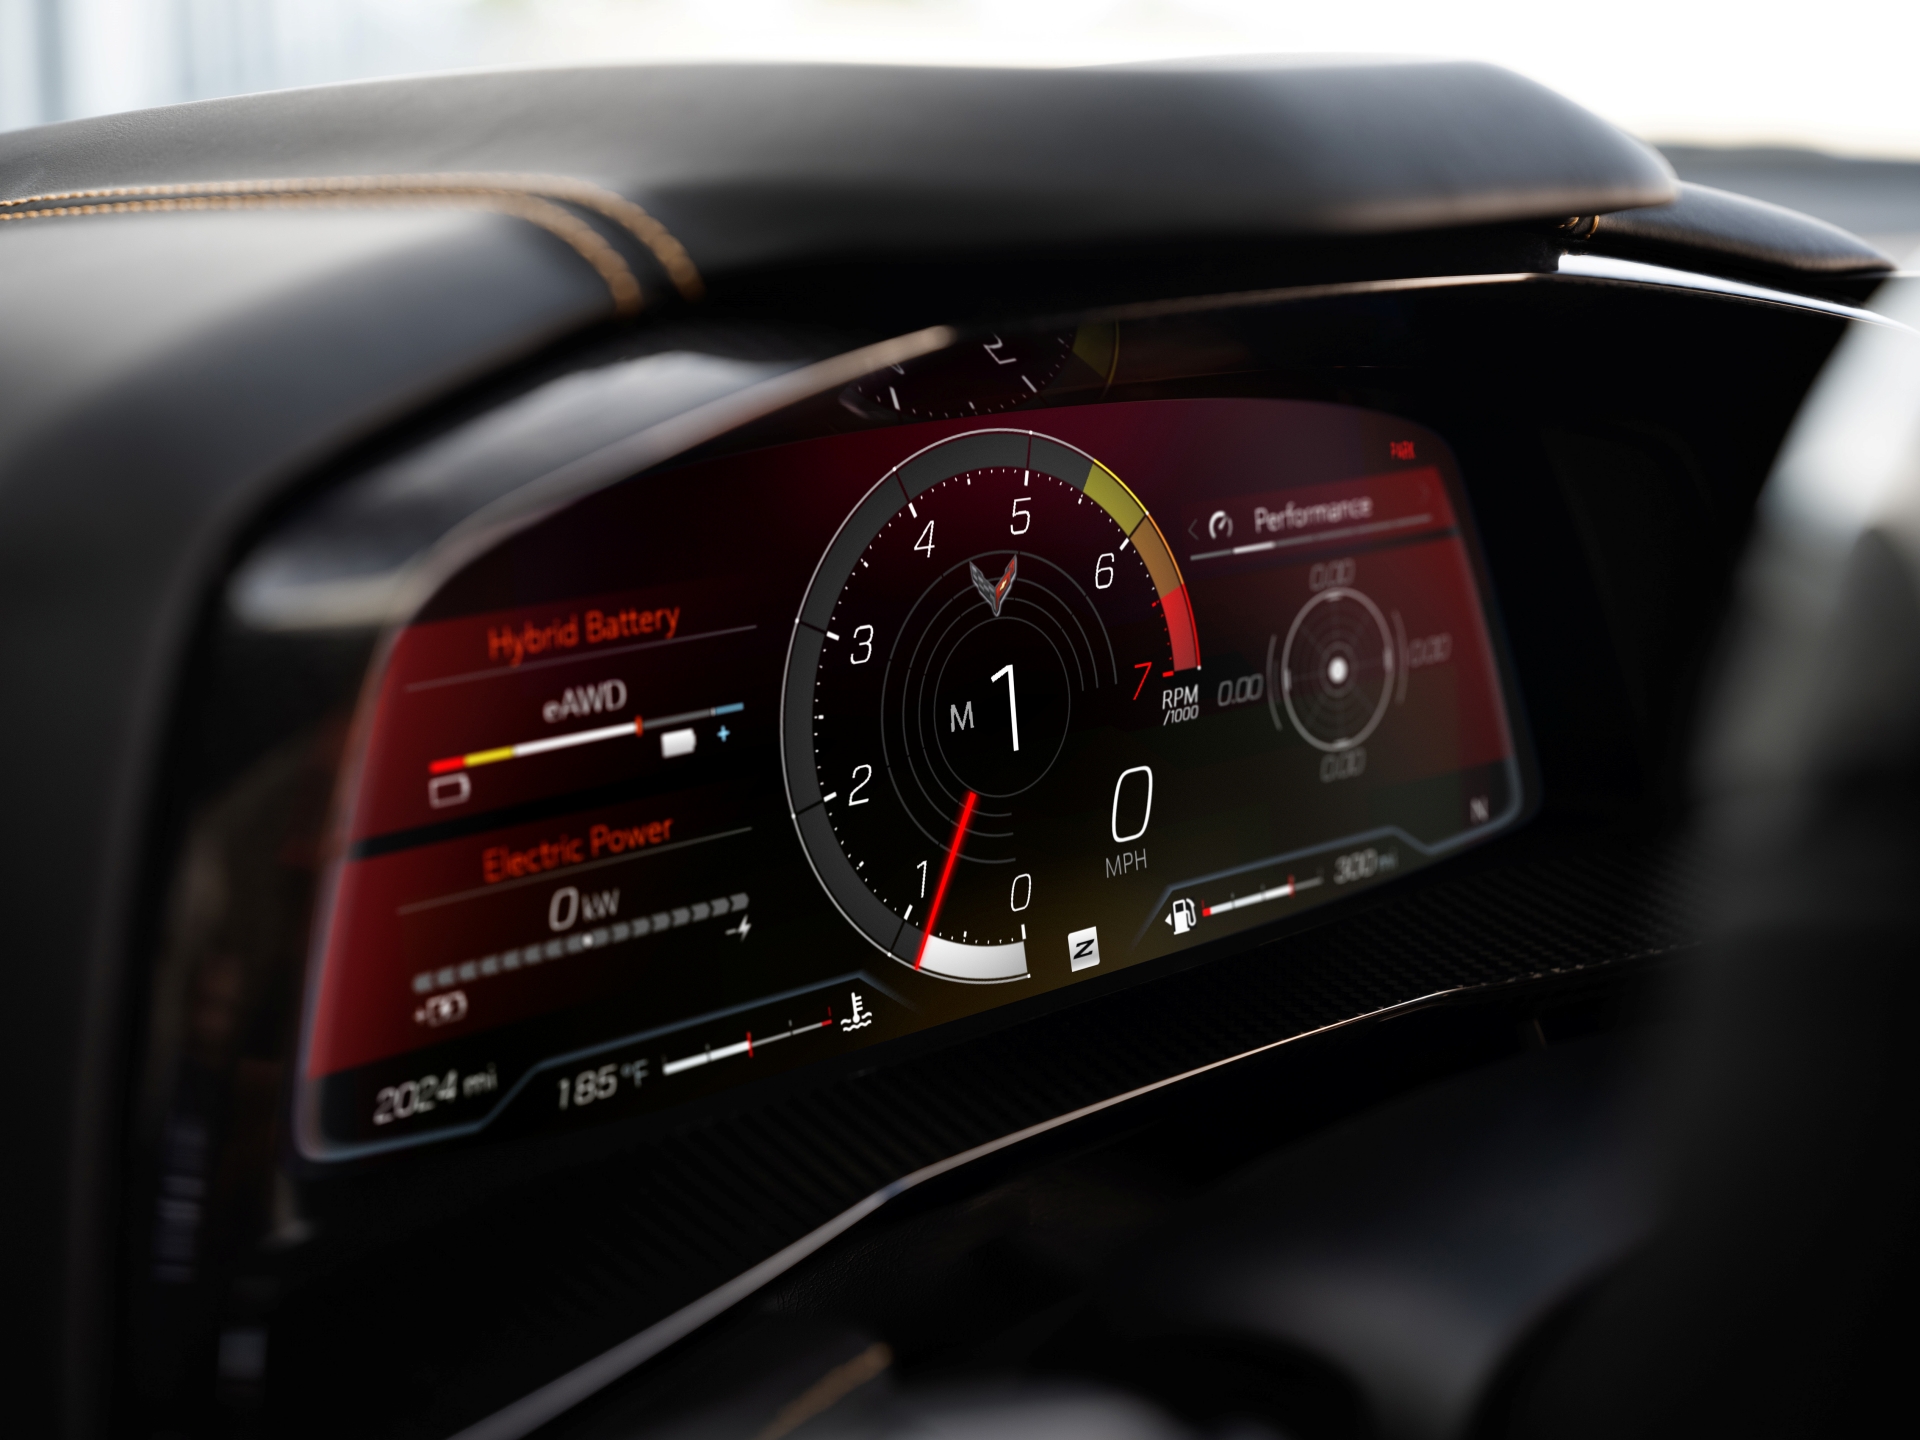 Close up view of gauges layout on E-Ray Performance App on the infotainment screen. Pre-production model shown. Actual production model may vary. Model year 2024 Corvette E-Ray available 2023.